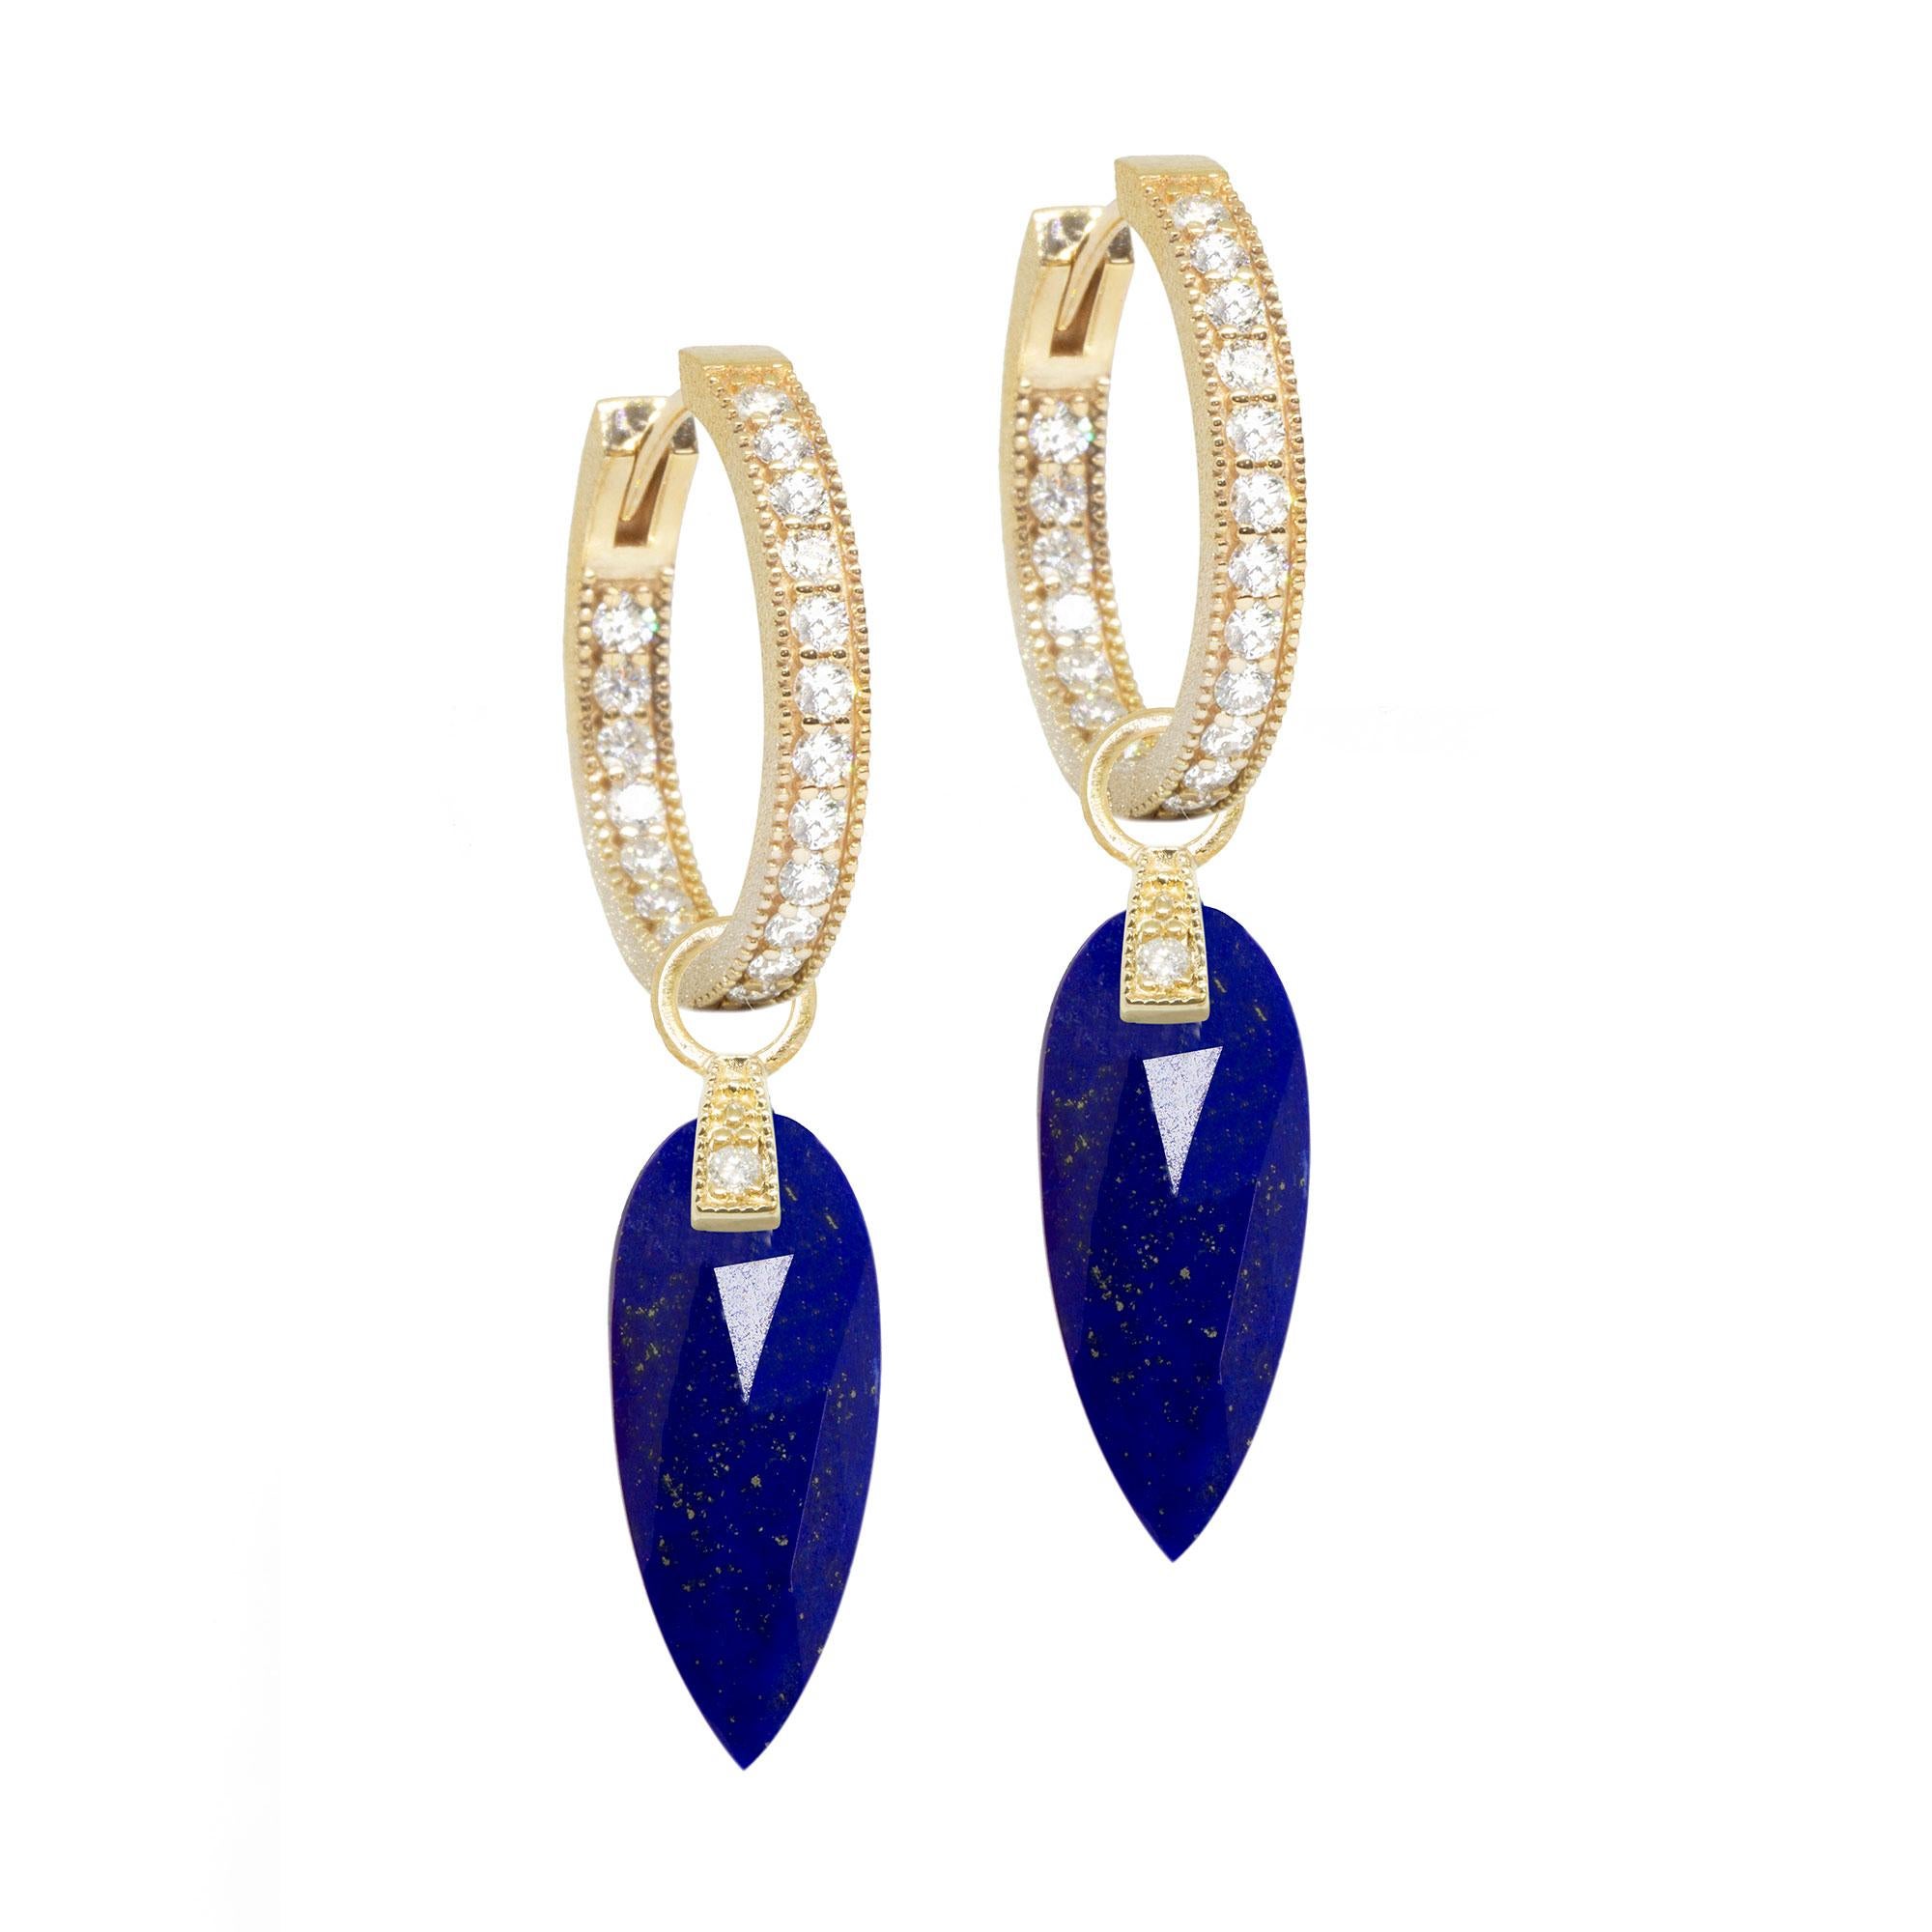 The perfect everyday style, the Angel Wings 20mm Gold Charms feature lapis drops dangling from a gemstone-studded bale.

Nina Nguyen Design's patent-pending earrings have an element on the back of the stud or charm to allow these pieces to